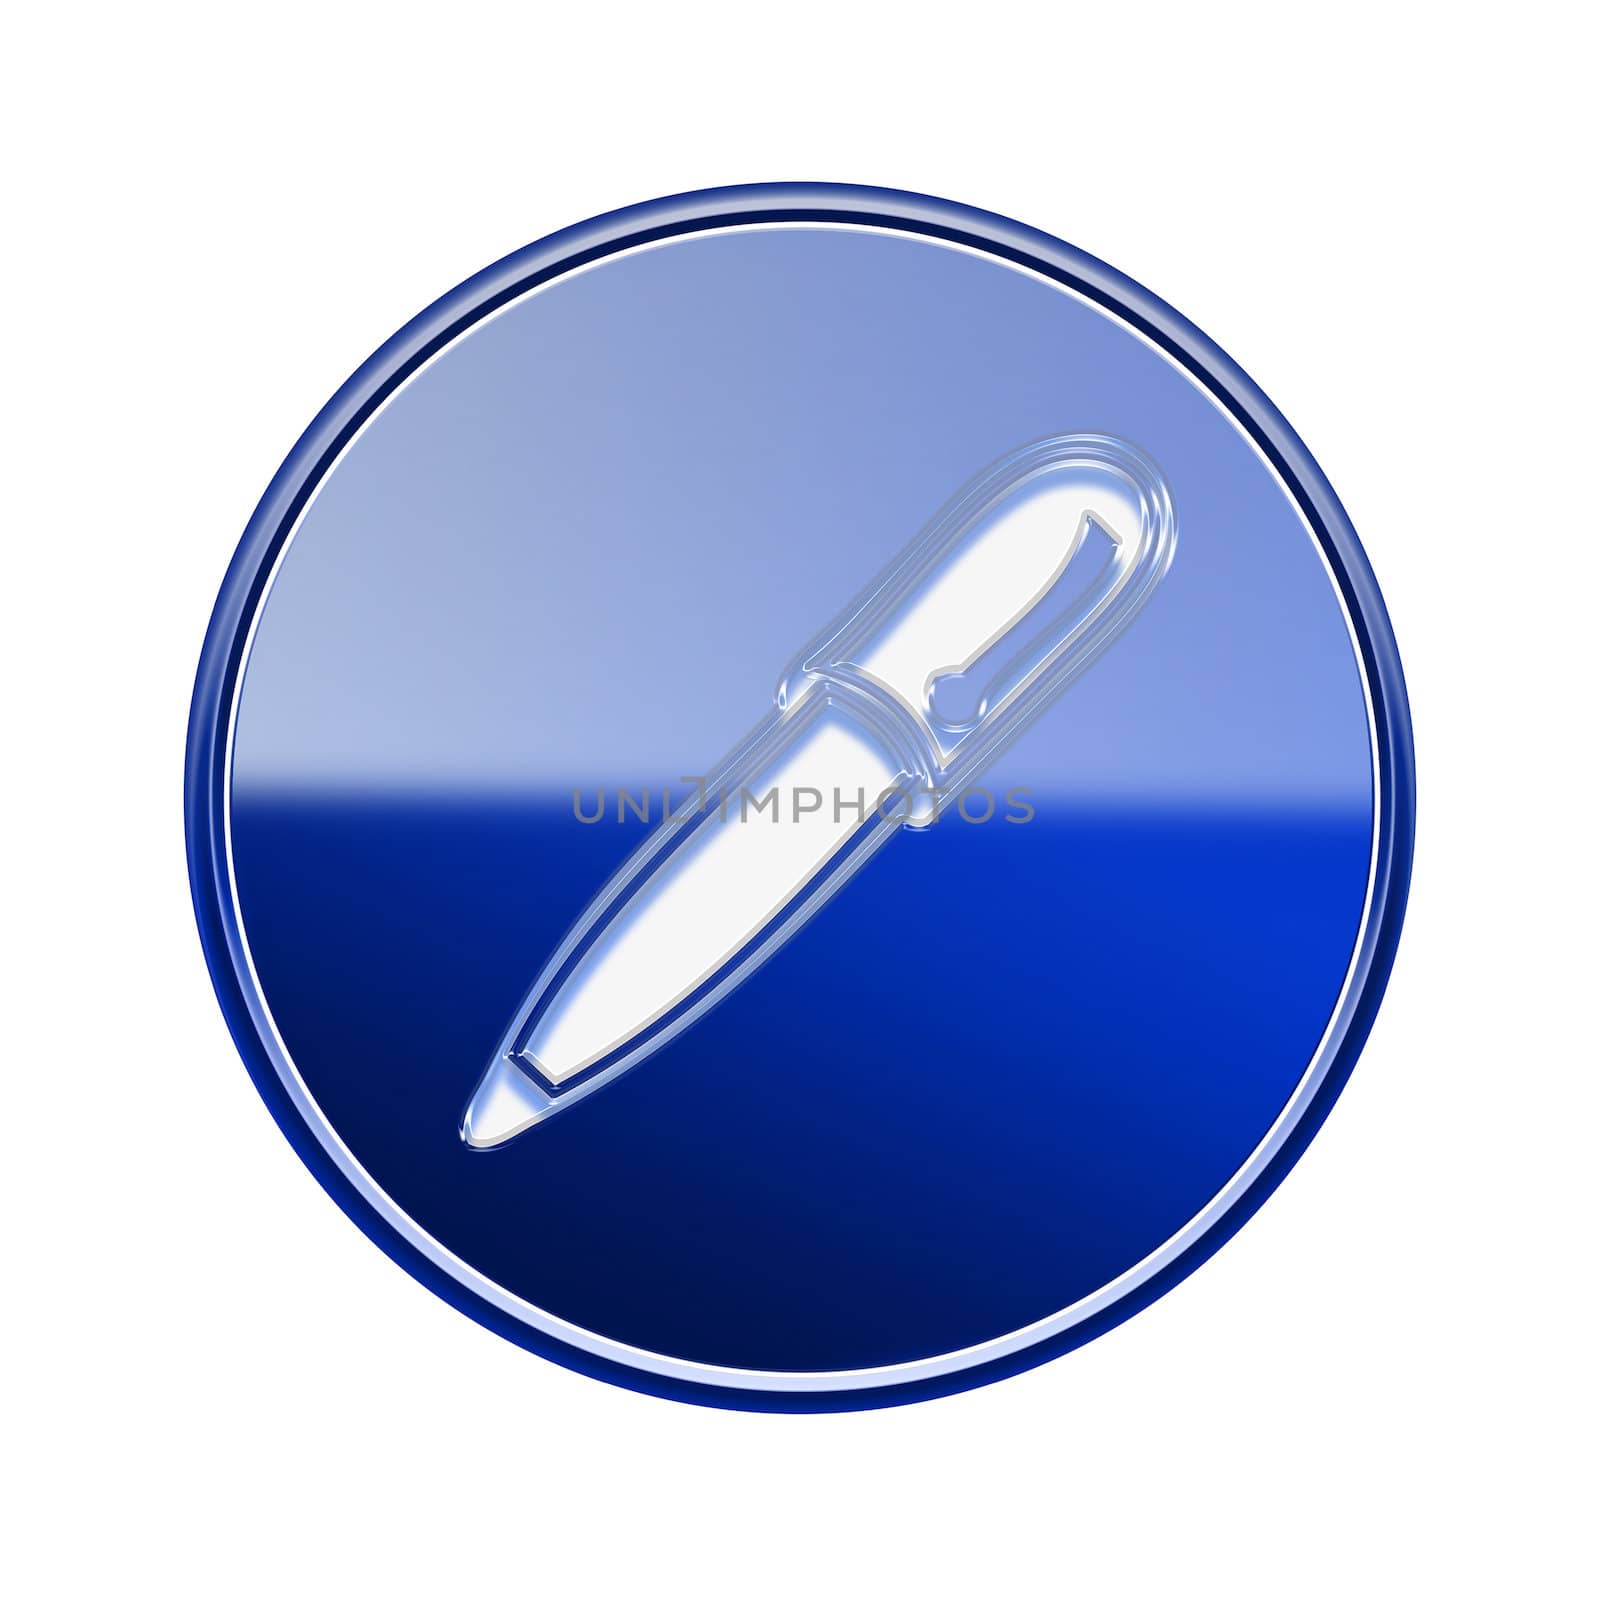 Pen icon glossy blue, isolated on white background